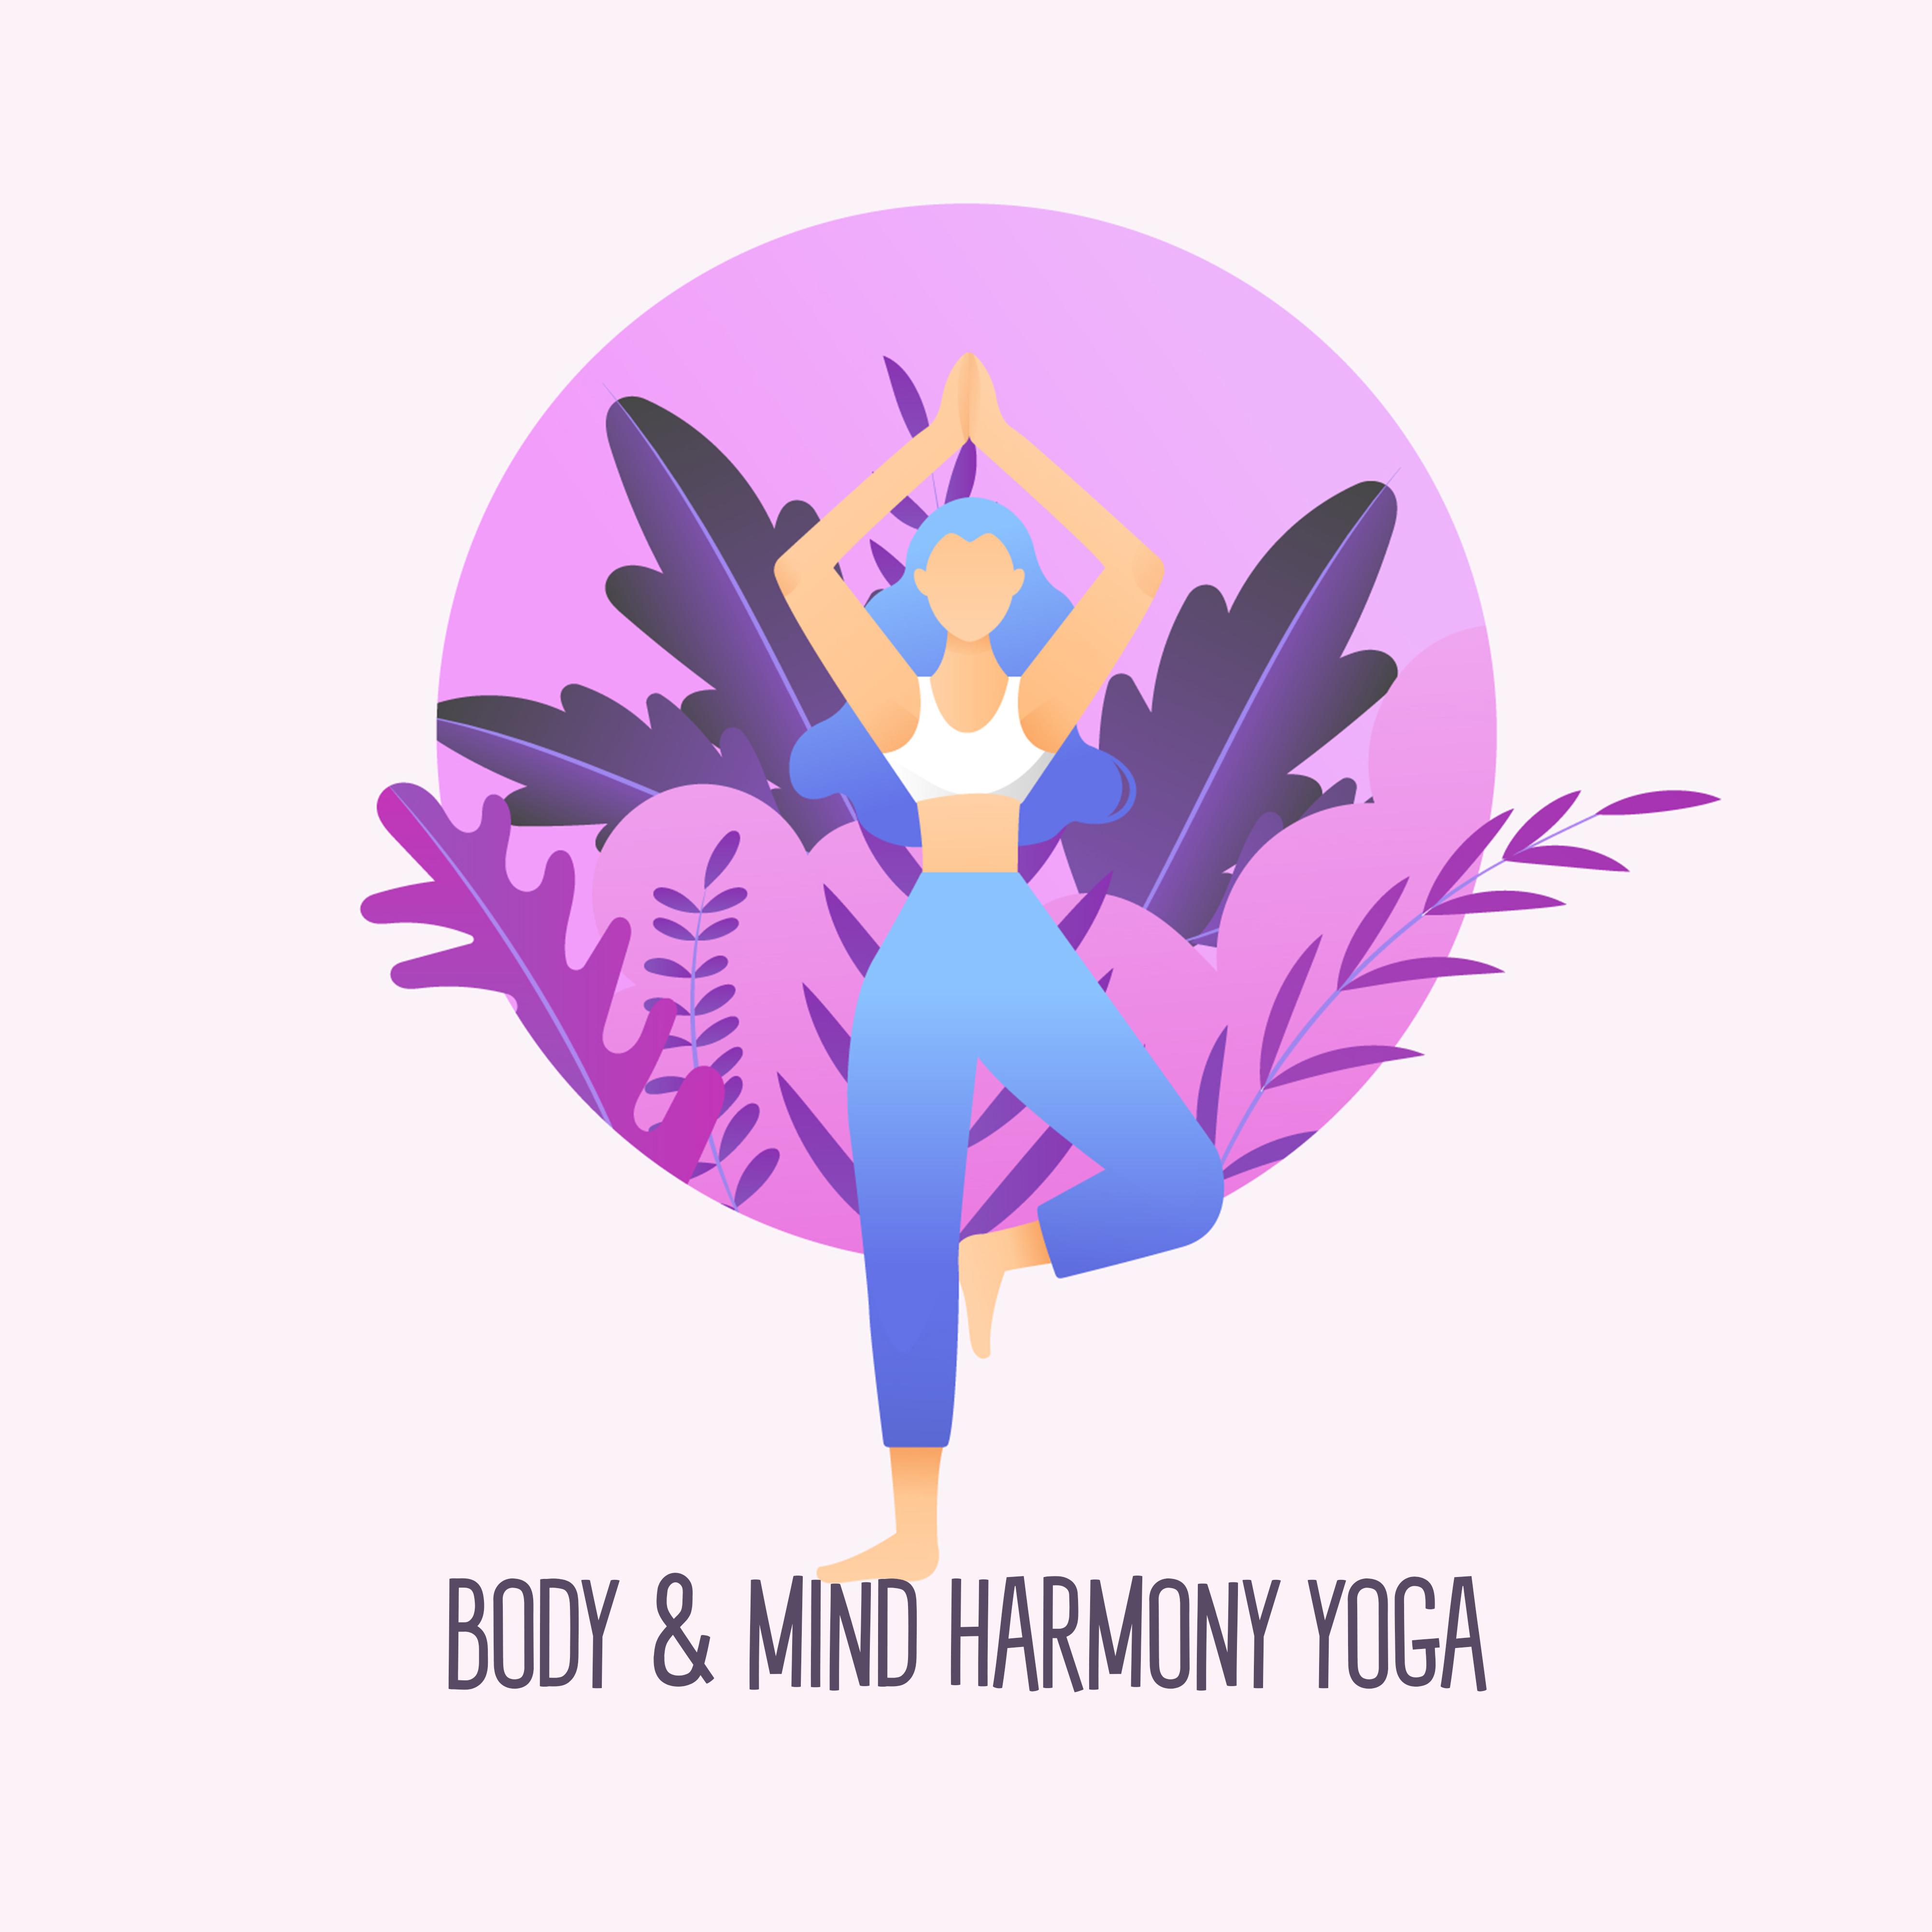 Body & Mind Harmony Yoga: Compilation of Ambient New Age 2019 Music for Meditation & Deep Relaxation, Chakras Opening & Healing, Life Energy Increase, Zen, Mantra